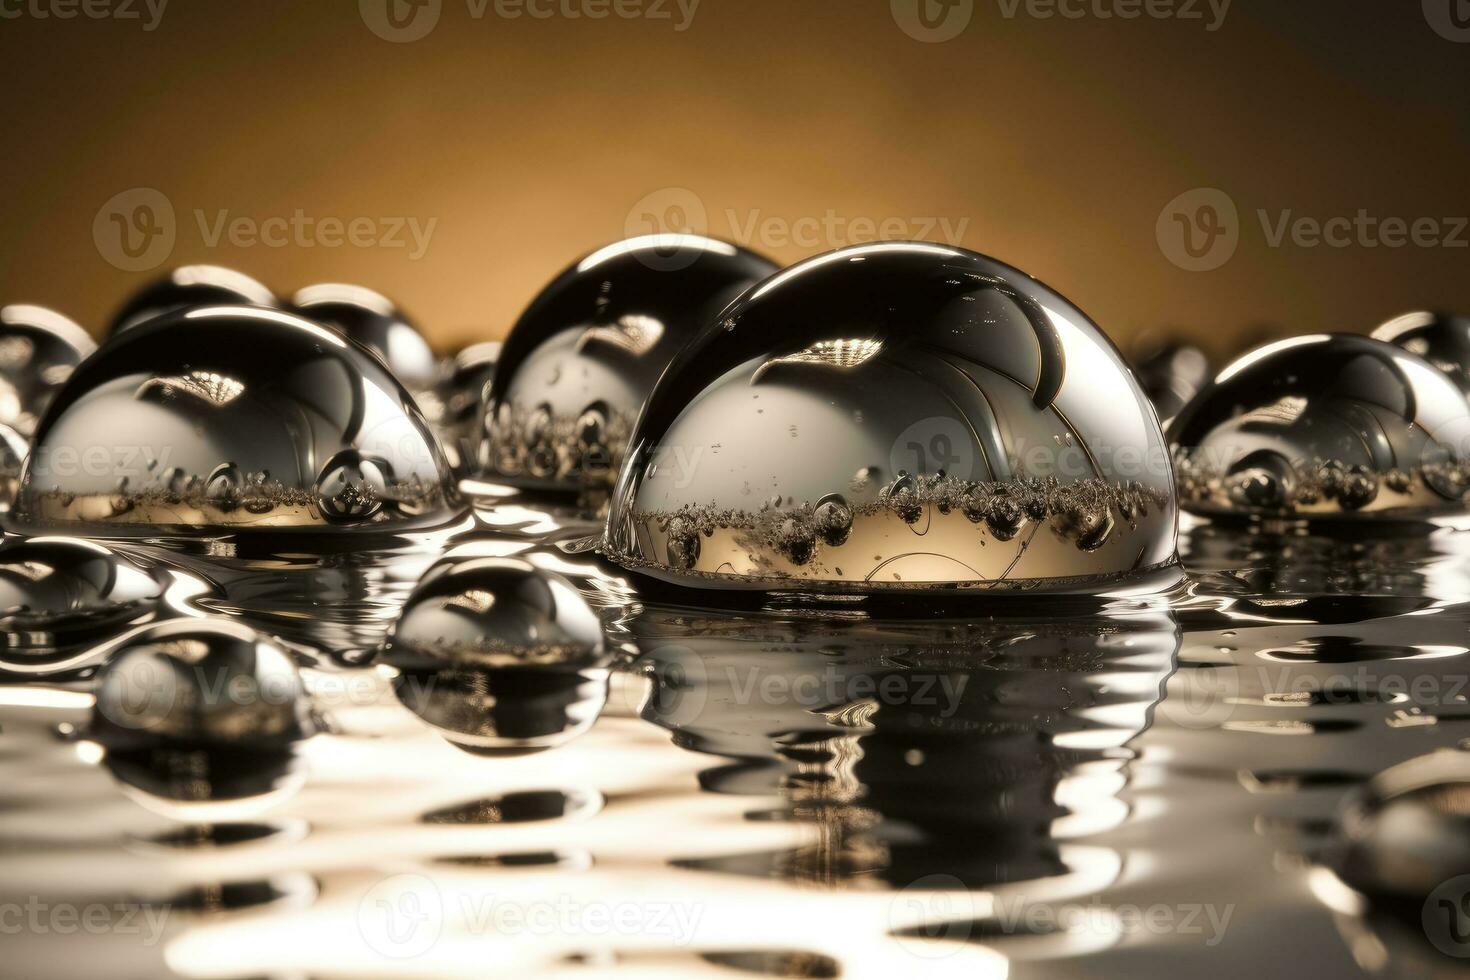 https://static.vecteezy.com/system/resources/previews/026/152/318/non_2x/surface-of-liquid-mercury-created-with-generative-ai-technology-photo.jpg